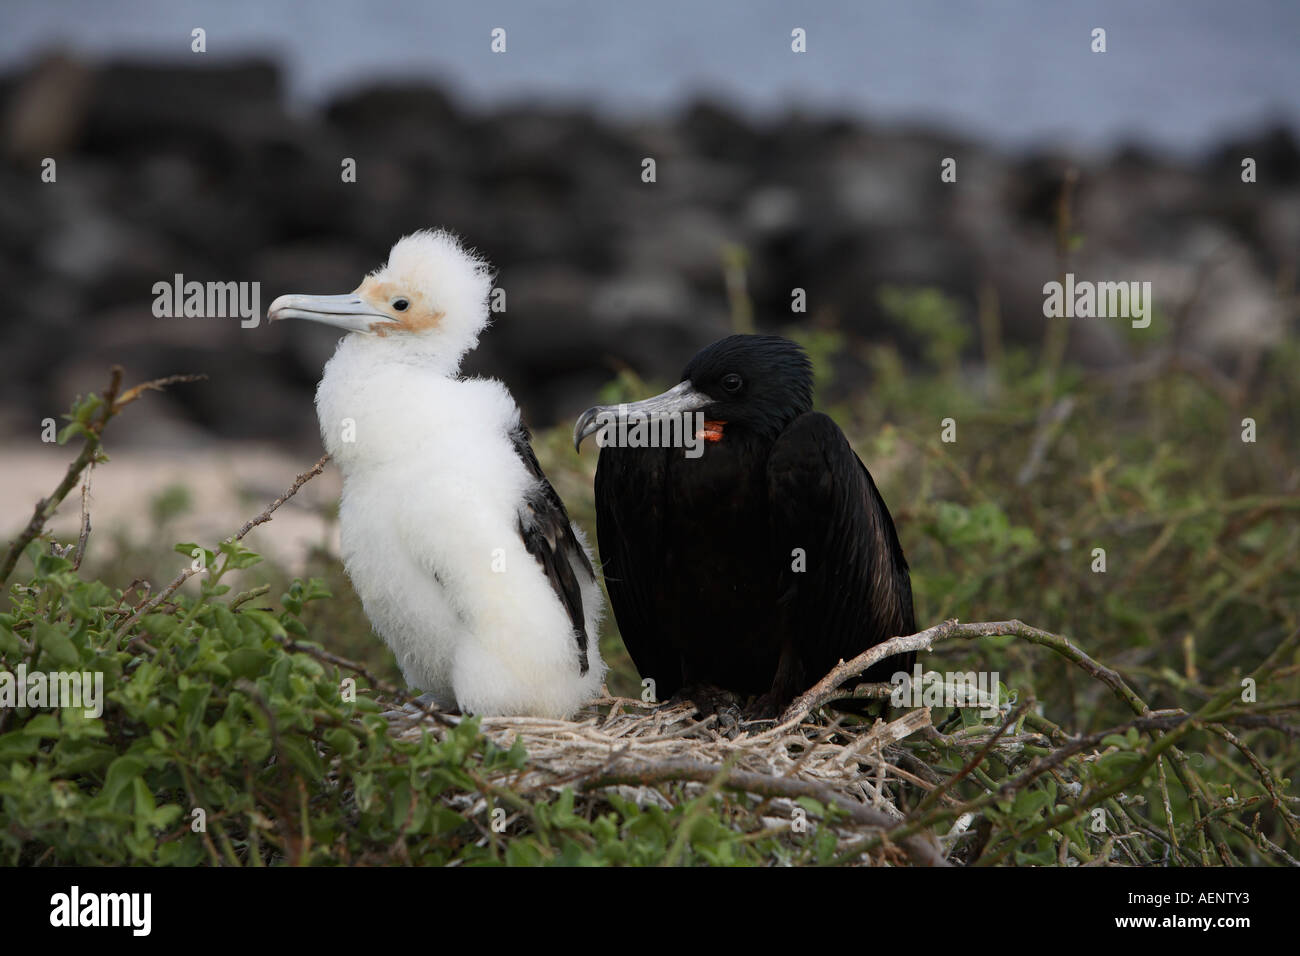 Great frigate bird parent on nest with nestling chick, North Seymour Island, Galapagos, Ecuador, South America Stock Photo